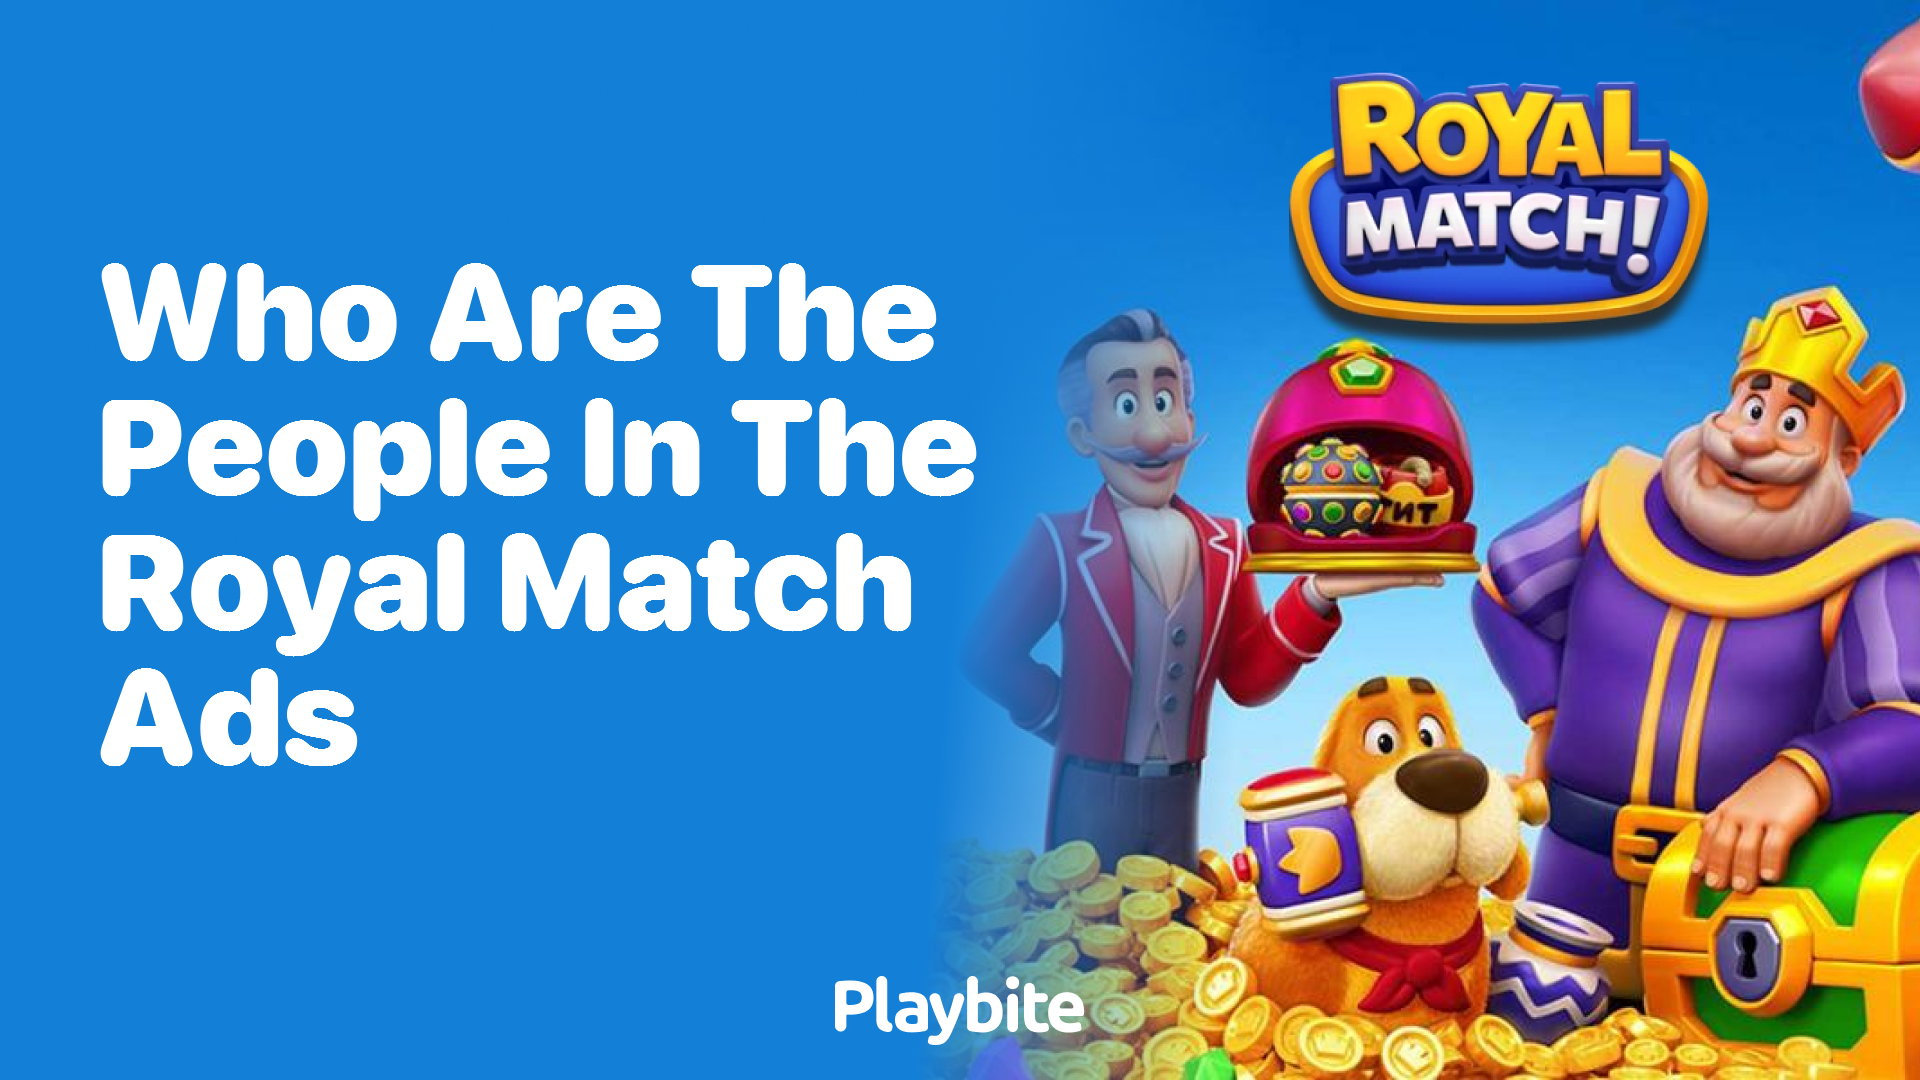 Who Are the People in the Royal Match Ads?